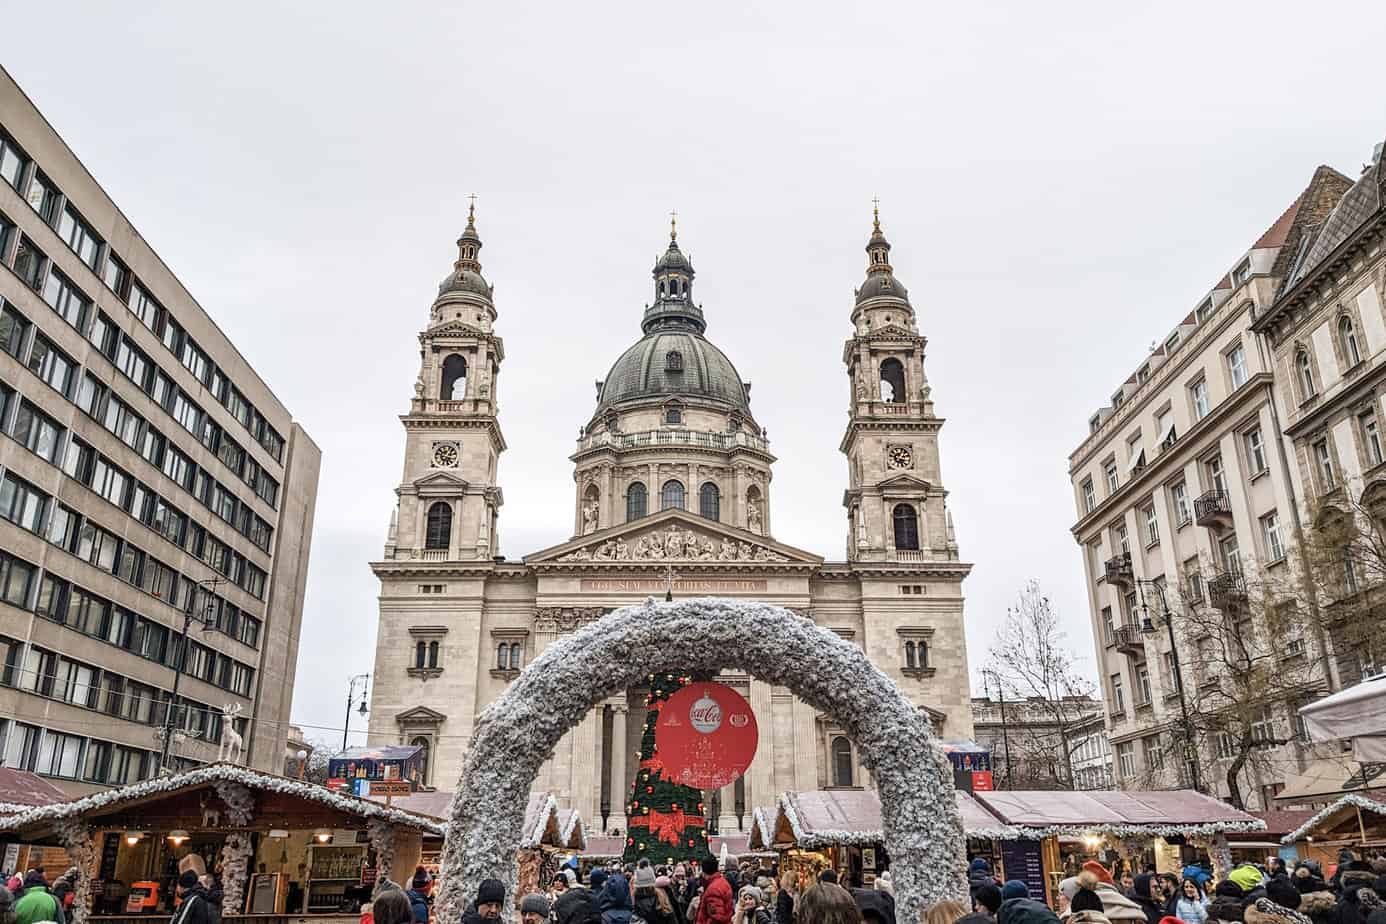 St. Stephens Basilica with Christmas tree, arch, and market stalls